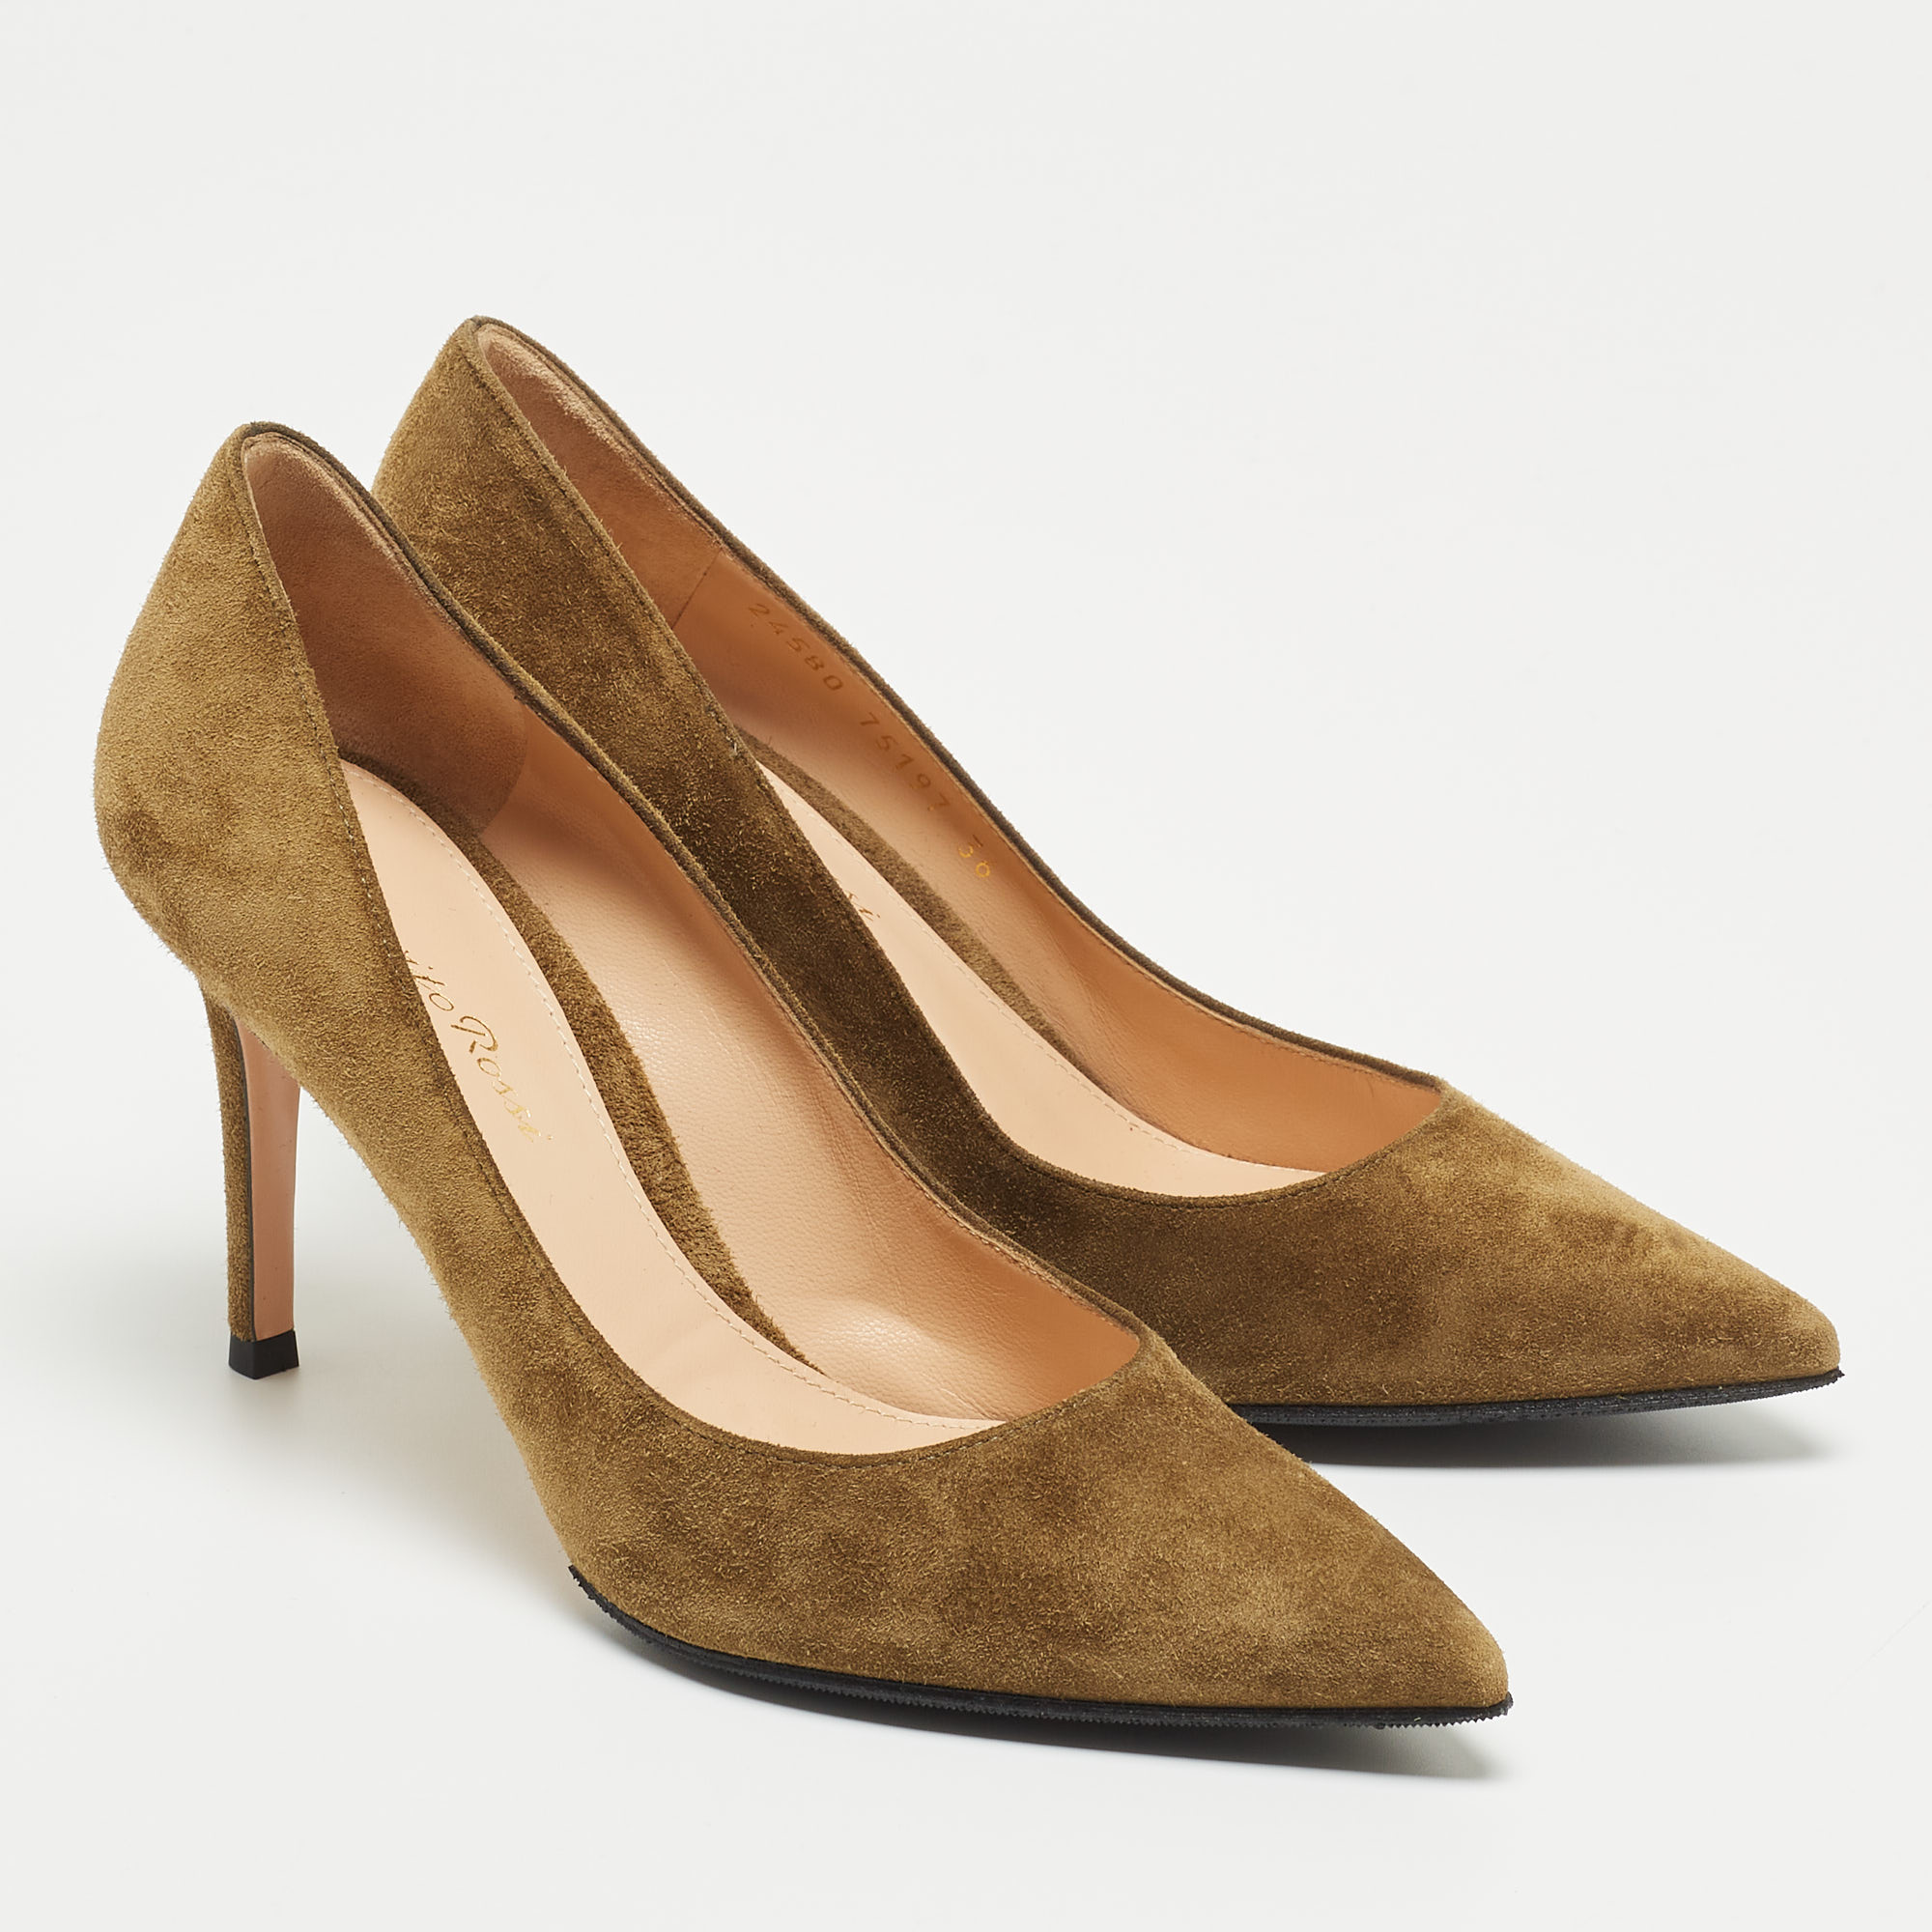 Gianvito Rossi Olive Green Suede Pointed Toe Pumps Size 36